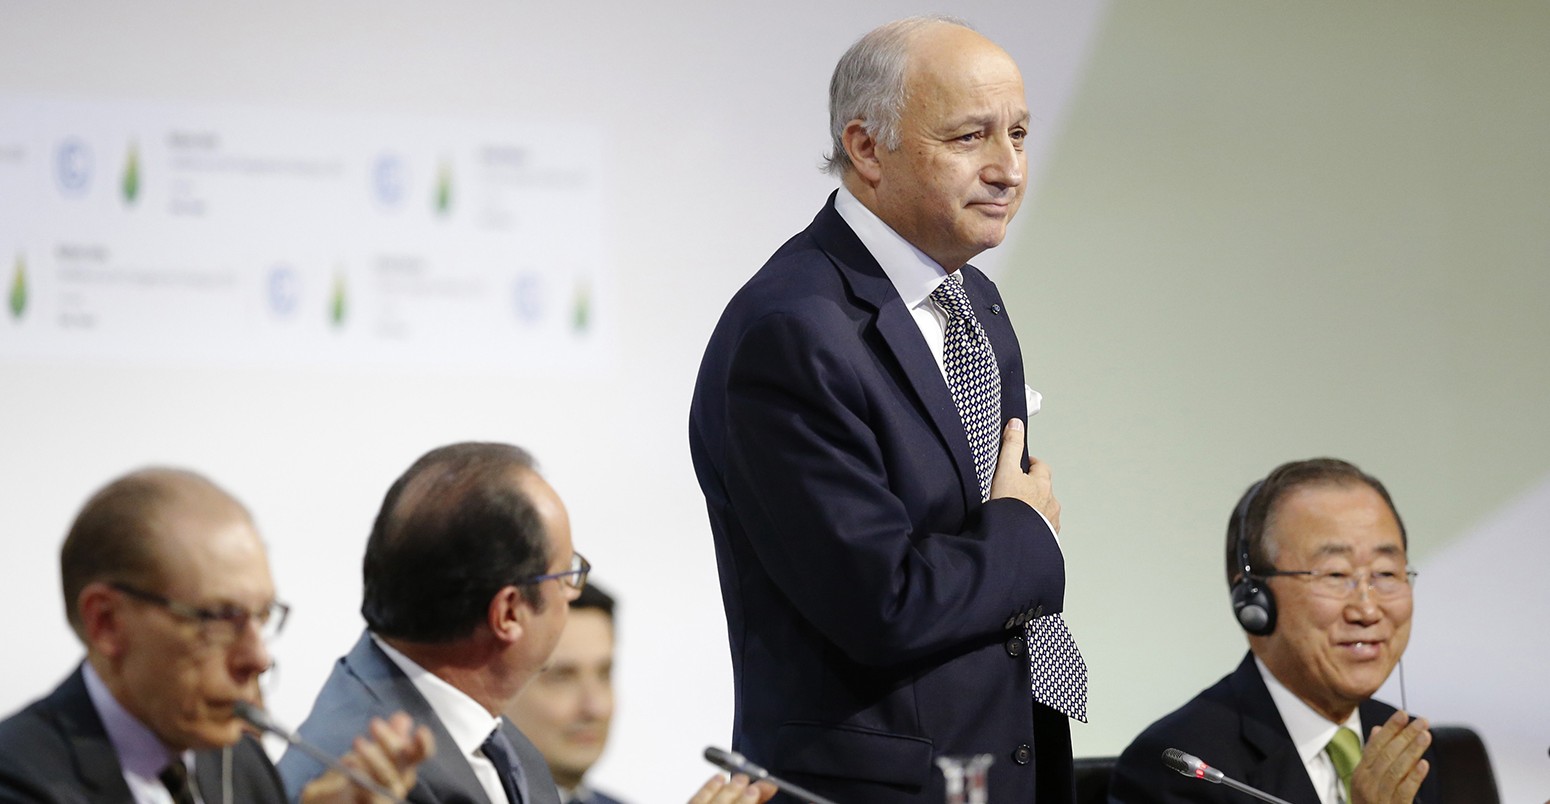 Laurent Fabius, puts his hand over his heart after his speech as he stands near Francois Hollande, and Ban Ki-moon at the World Climate Change Conference 2015 (COP21) at Le Bourget, near Paris, France